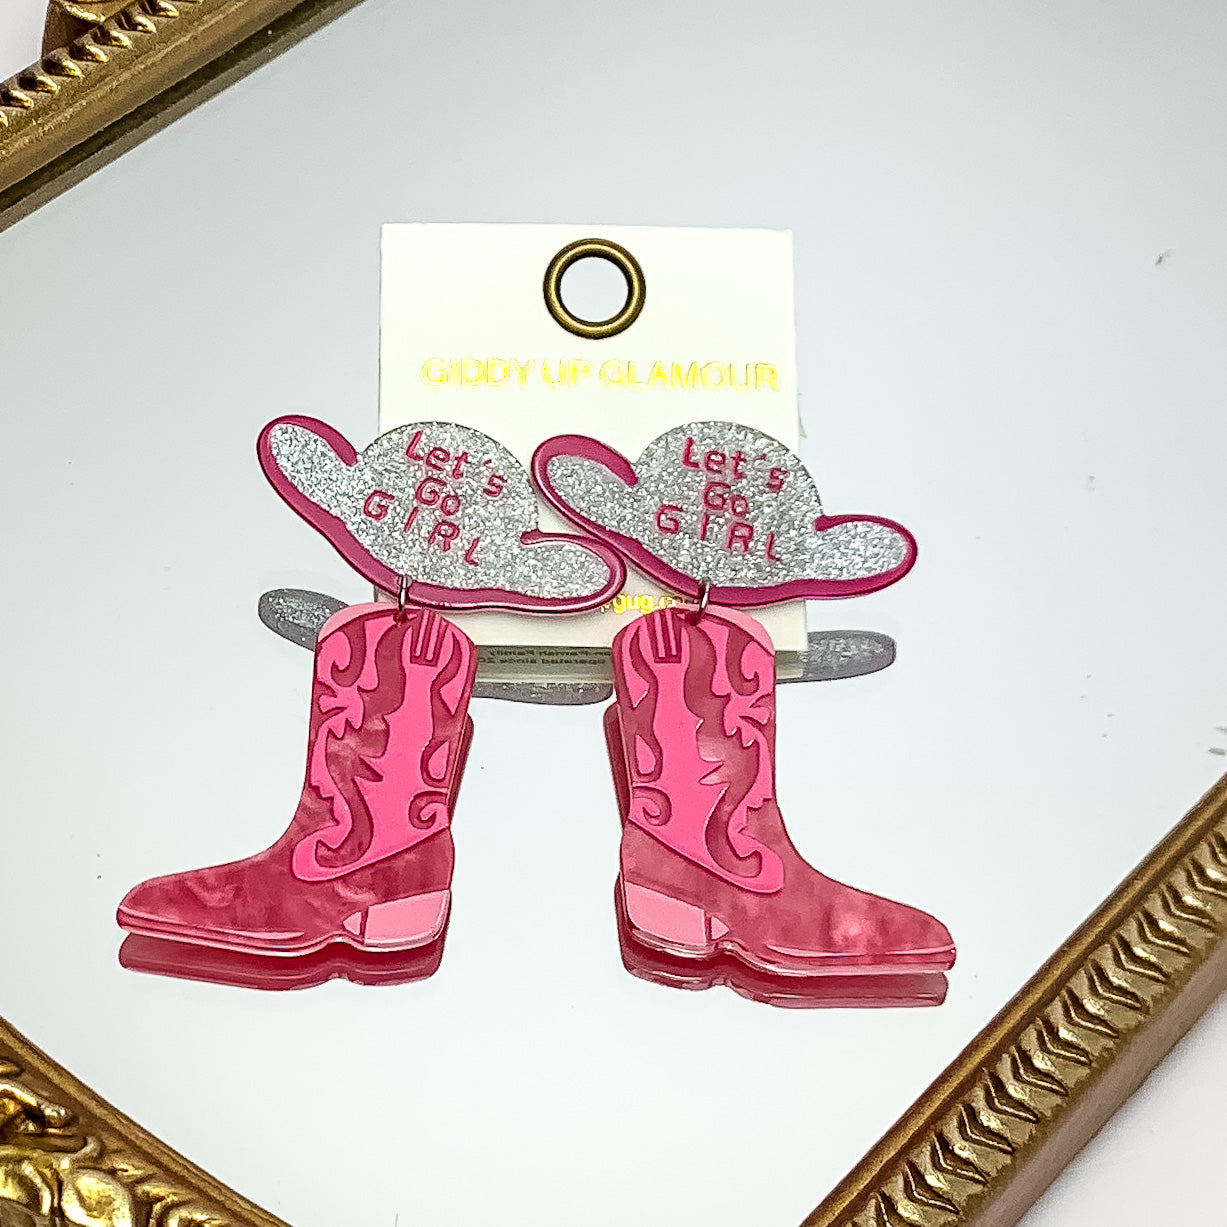 Let's Go Girl Cowboy Boot Earrings With Cowboy Hat Posts in Pink. Pictured on a mirror with a gold trim.